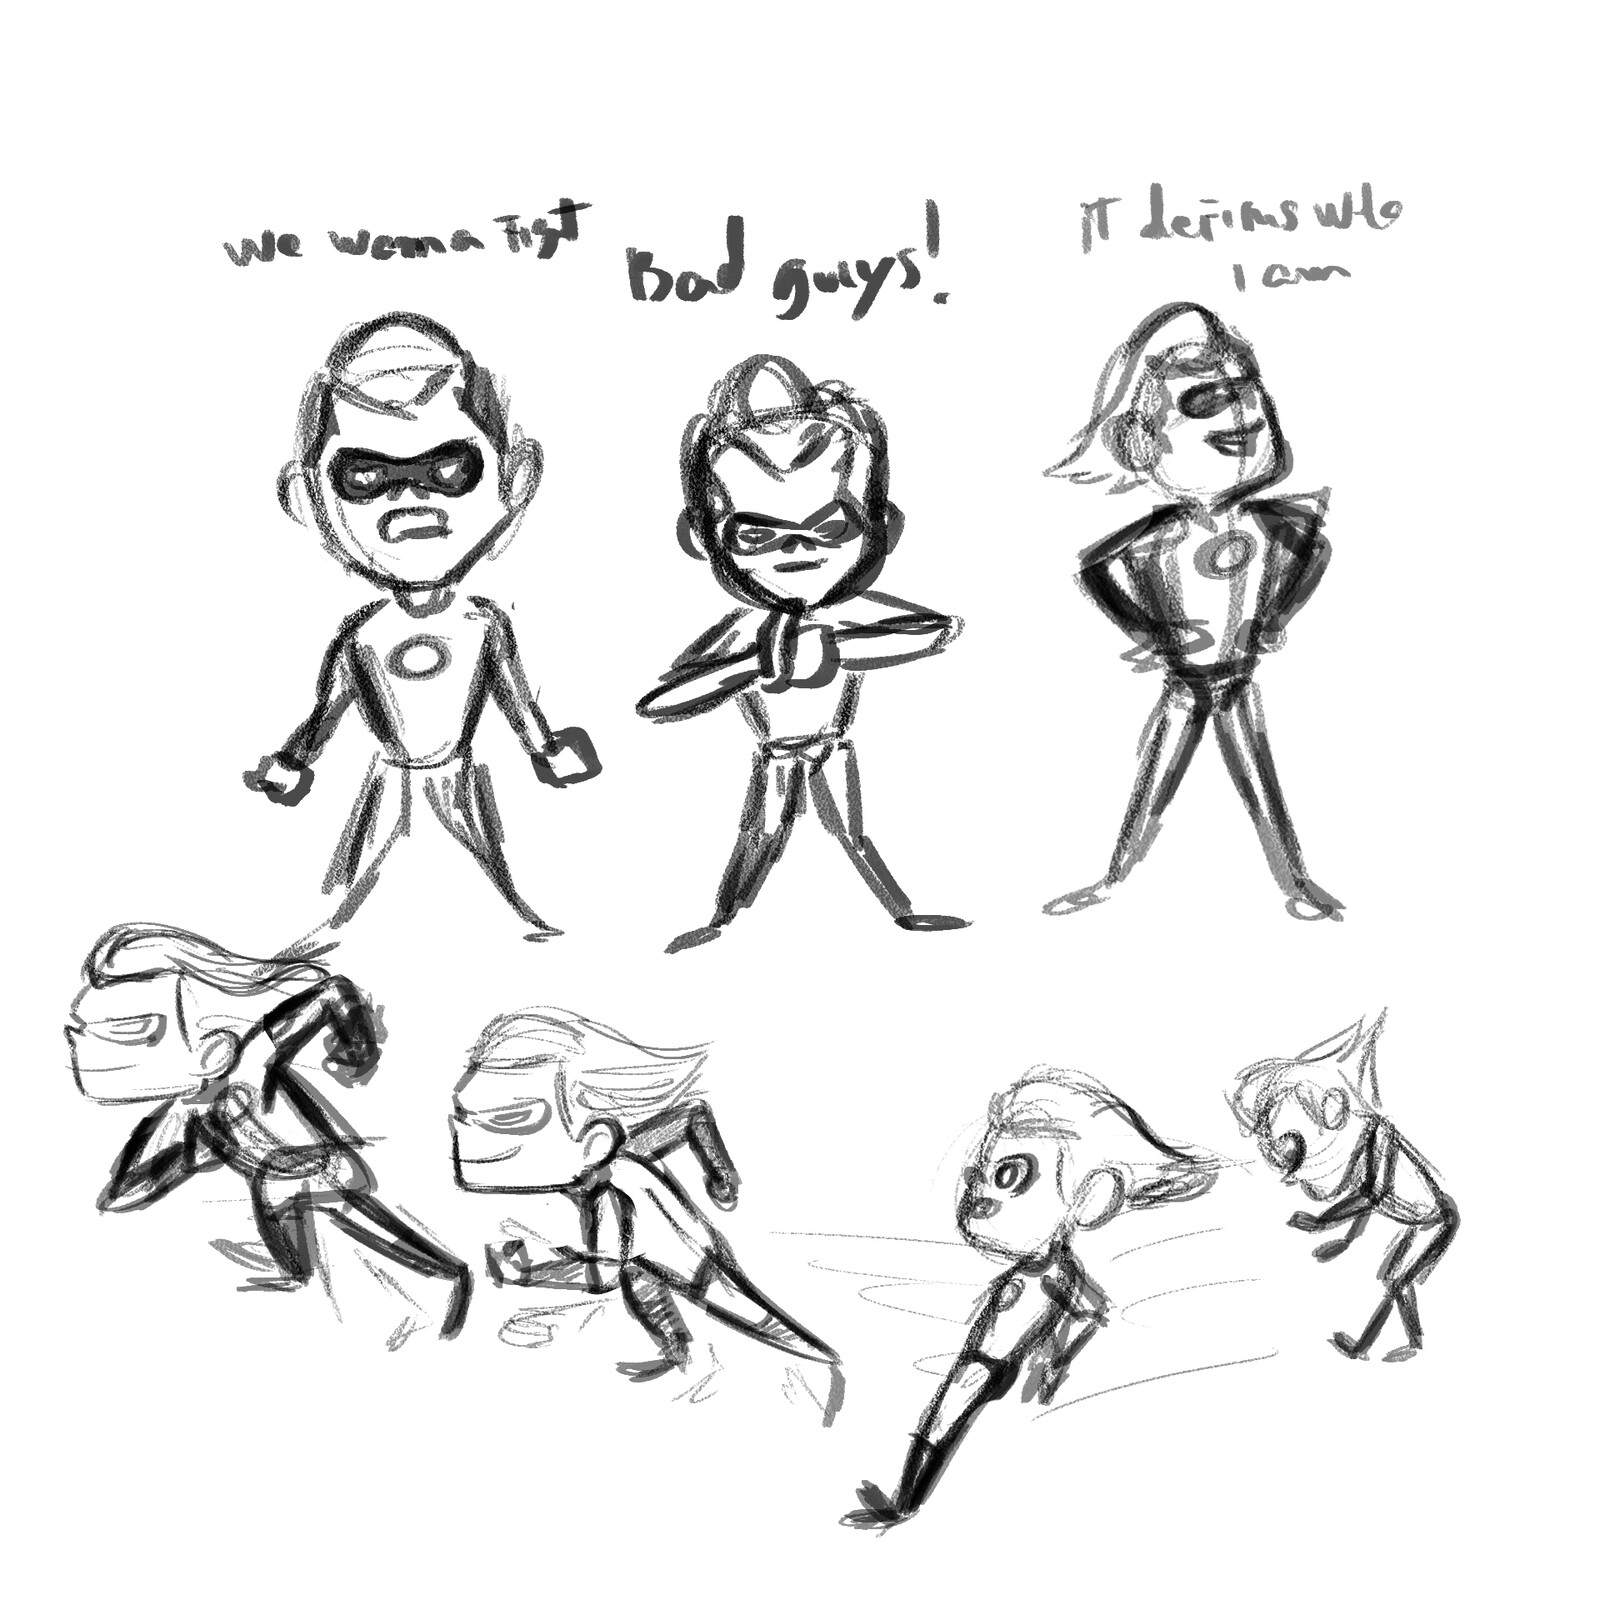 Quick sketches of some poses i wanted to hit in the animation